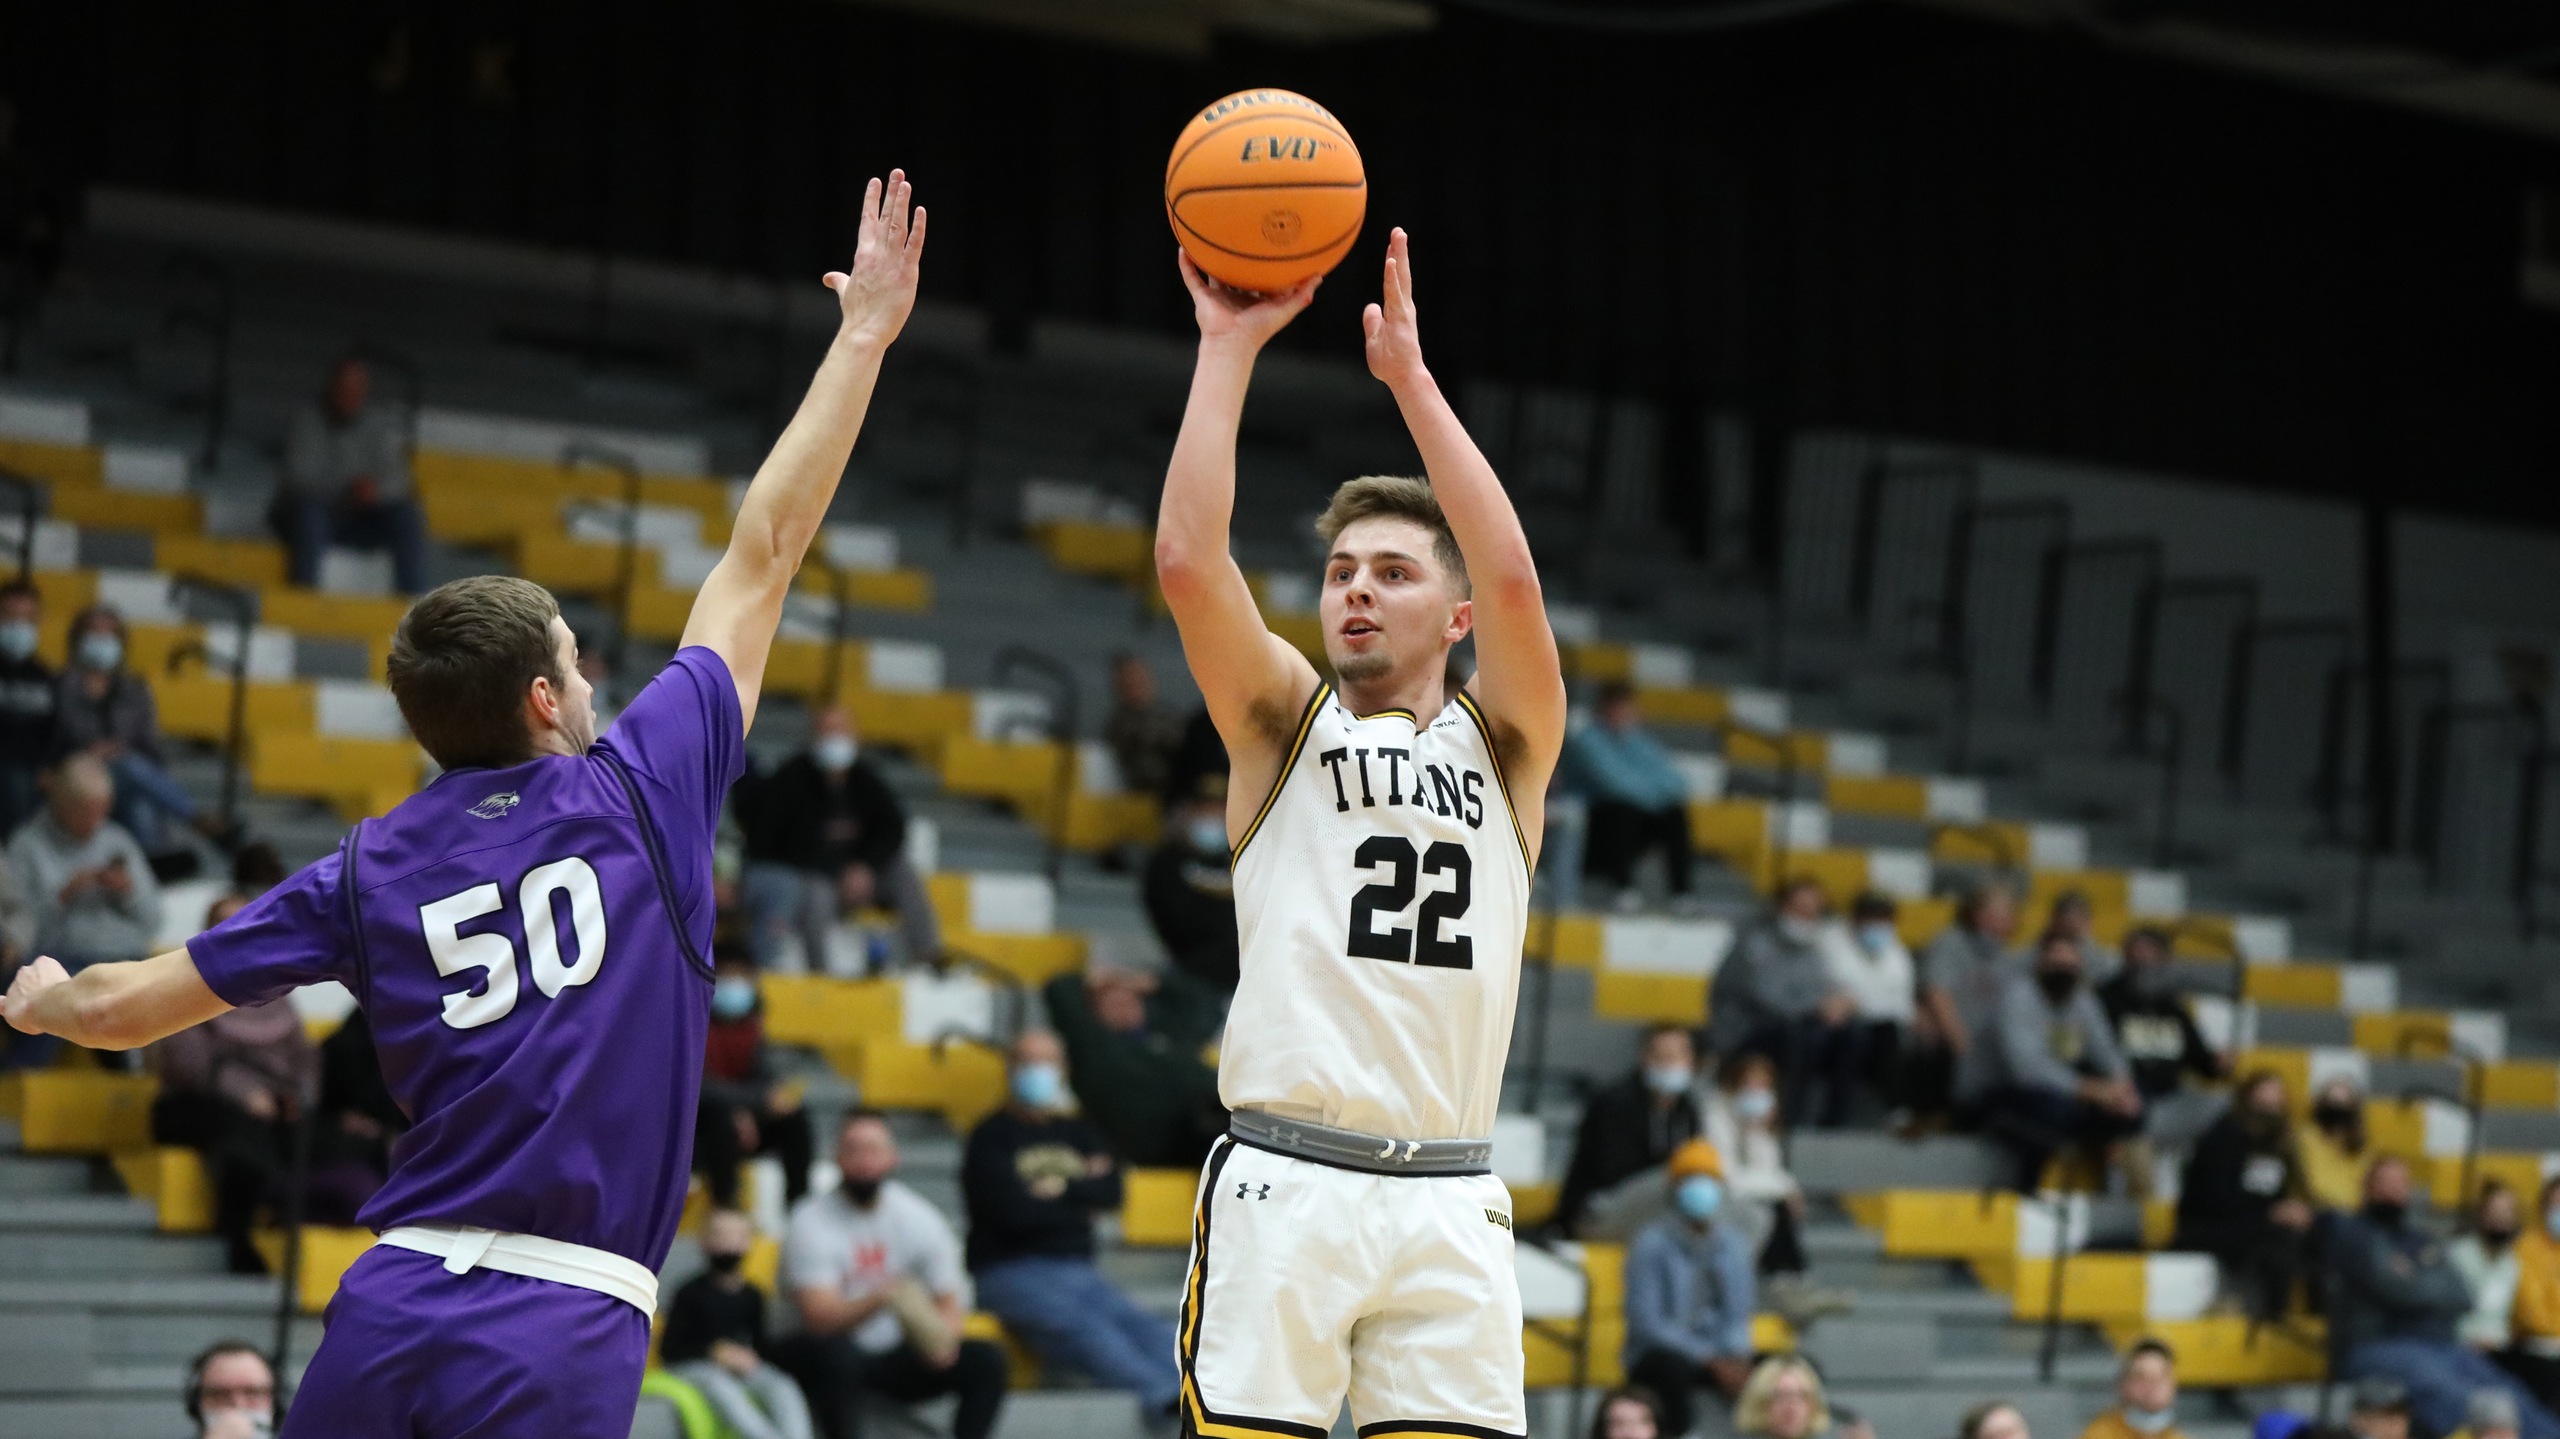 Cole Booth scored 14 points, including a trio of 3-point baskets, against the Pioneers.